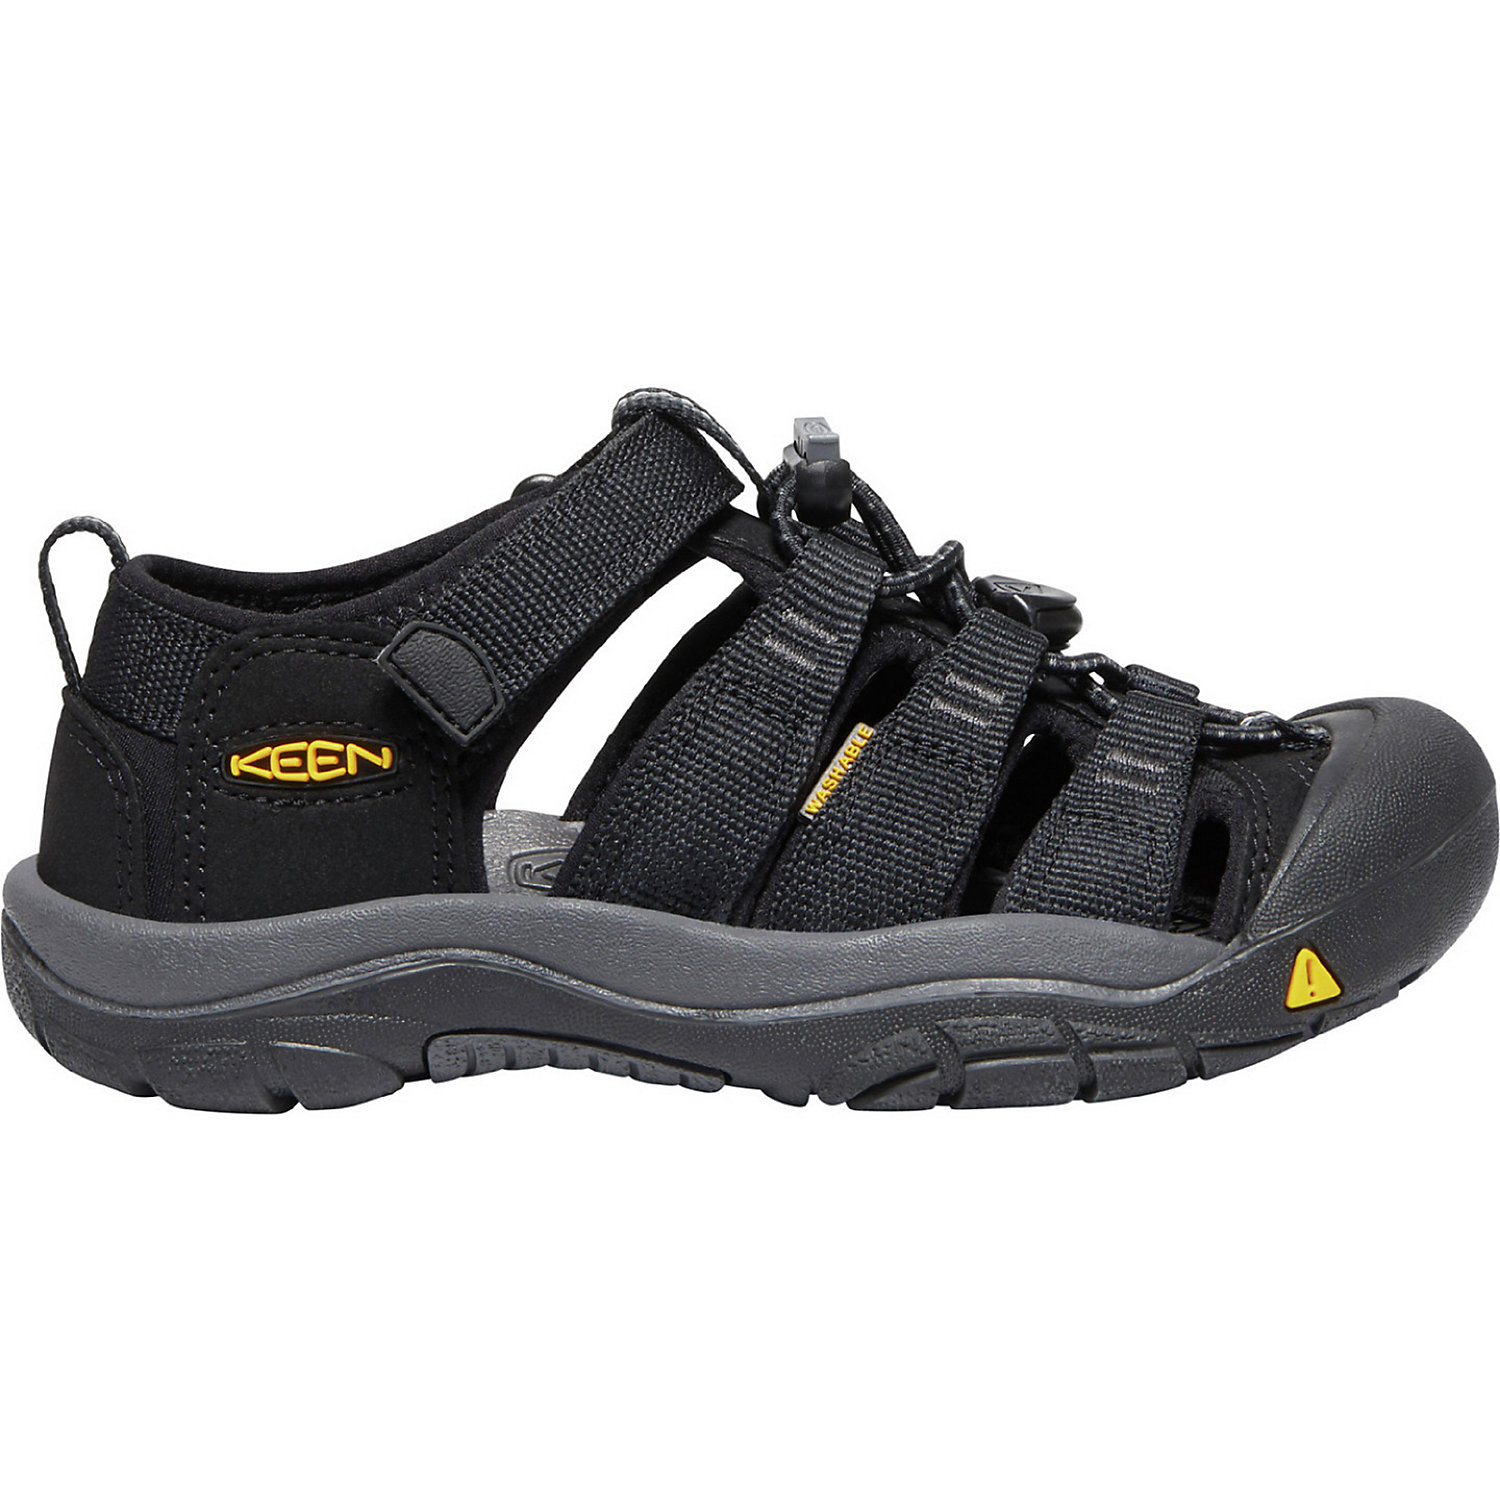 KEEN Kids Newport H2 Water Sandals with Toe Protection and Quick Dry